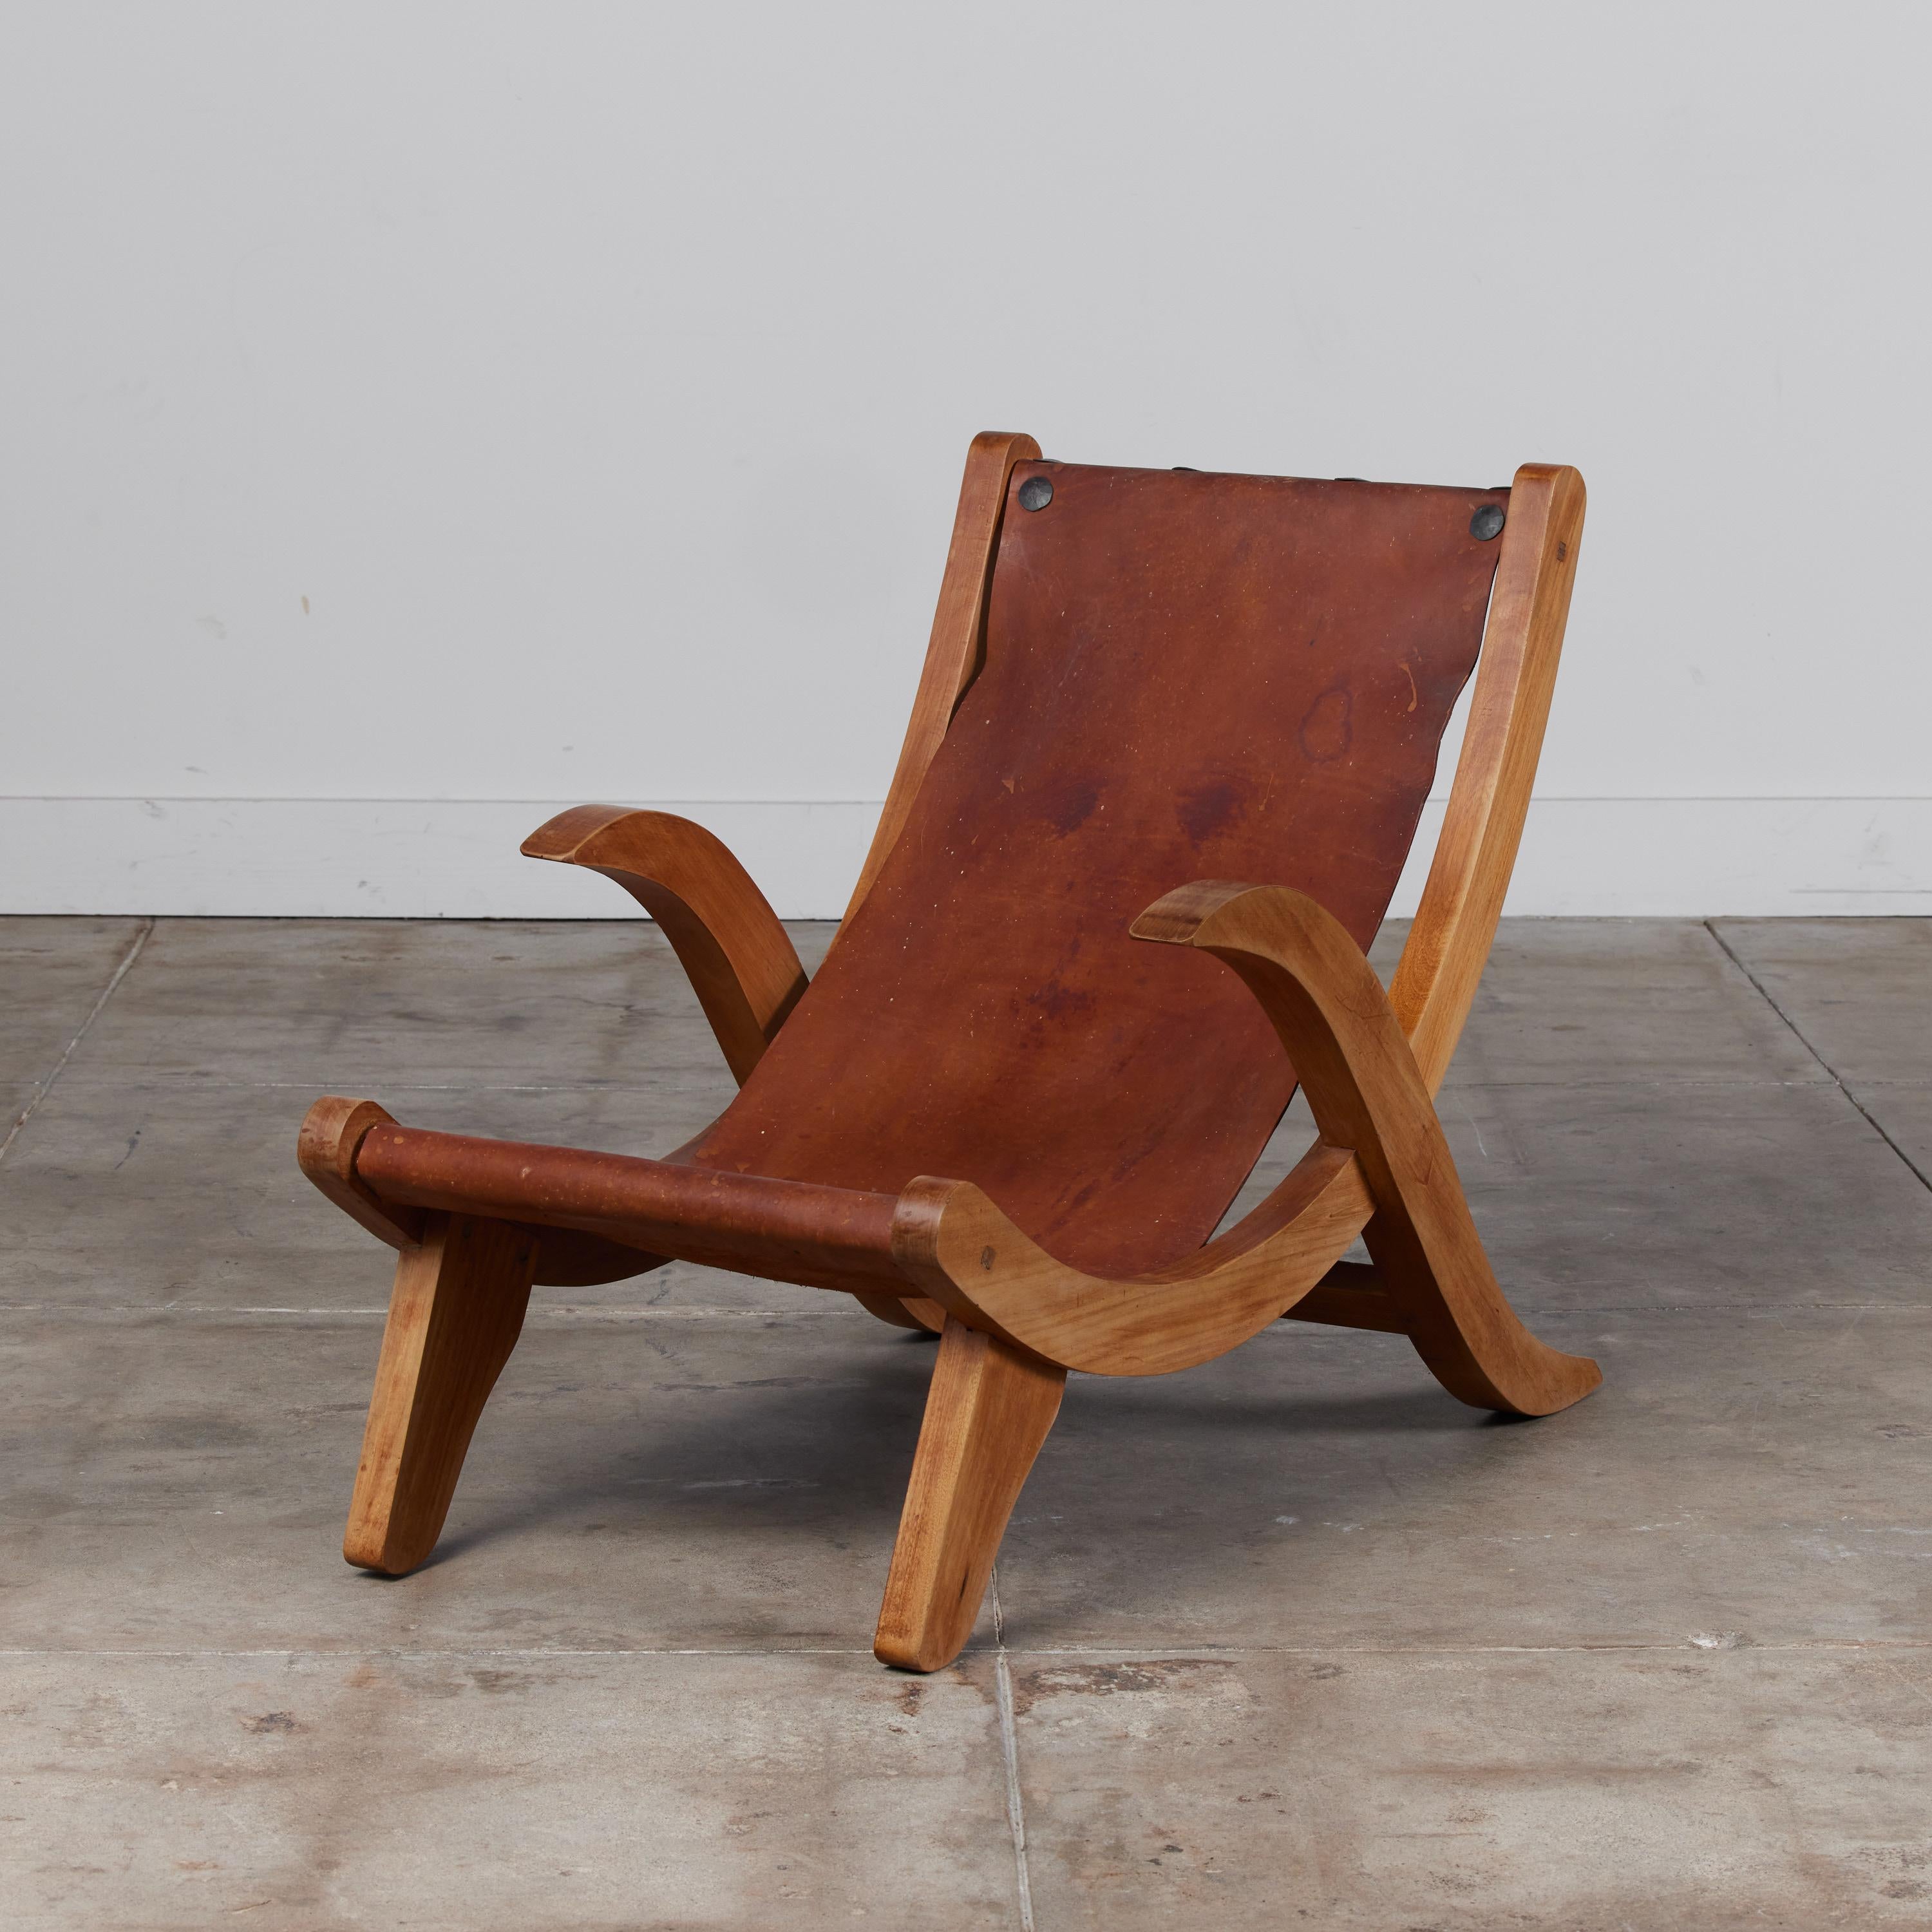 Clara Porset style butaque chair c.1970s, Mexico. The lounge chair features a curvaceous solid mahogany frame with the original brown saddle leather sling seat. The leather is wrapped around the frame and attached with patinated steel